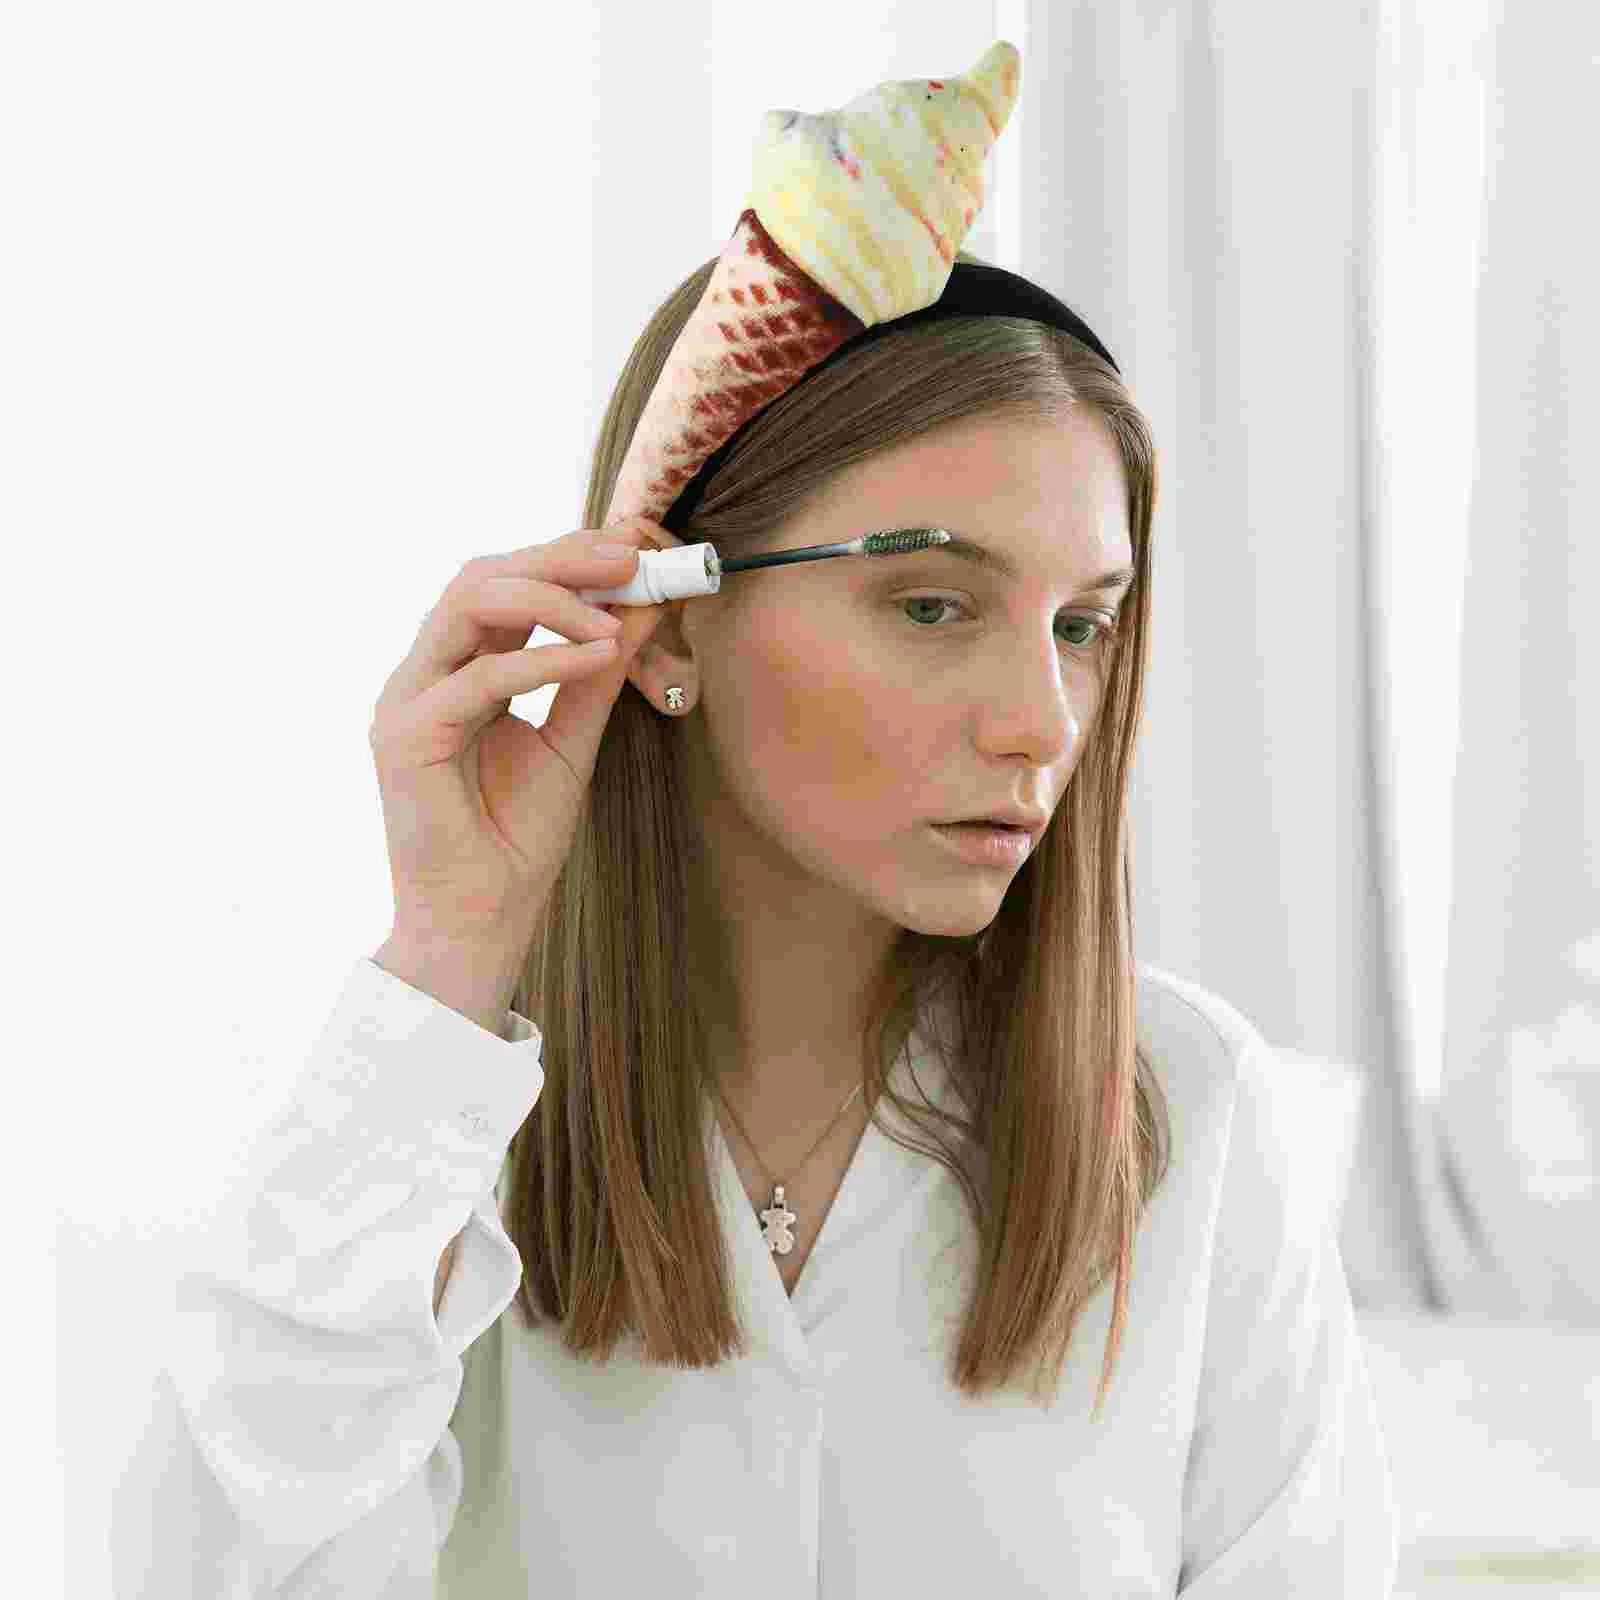 

Ice Cream Headband Cone Shape Headpiece Women Girls Funny Hair Hoop for Washing Face Party Costume Dresssing Up Cosplay Decor